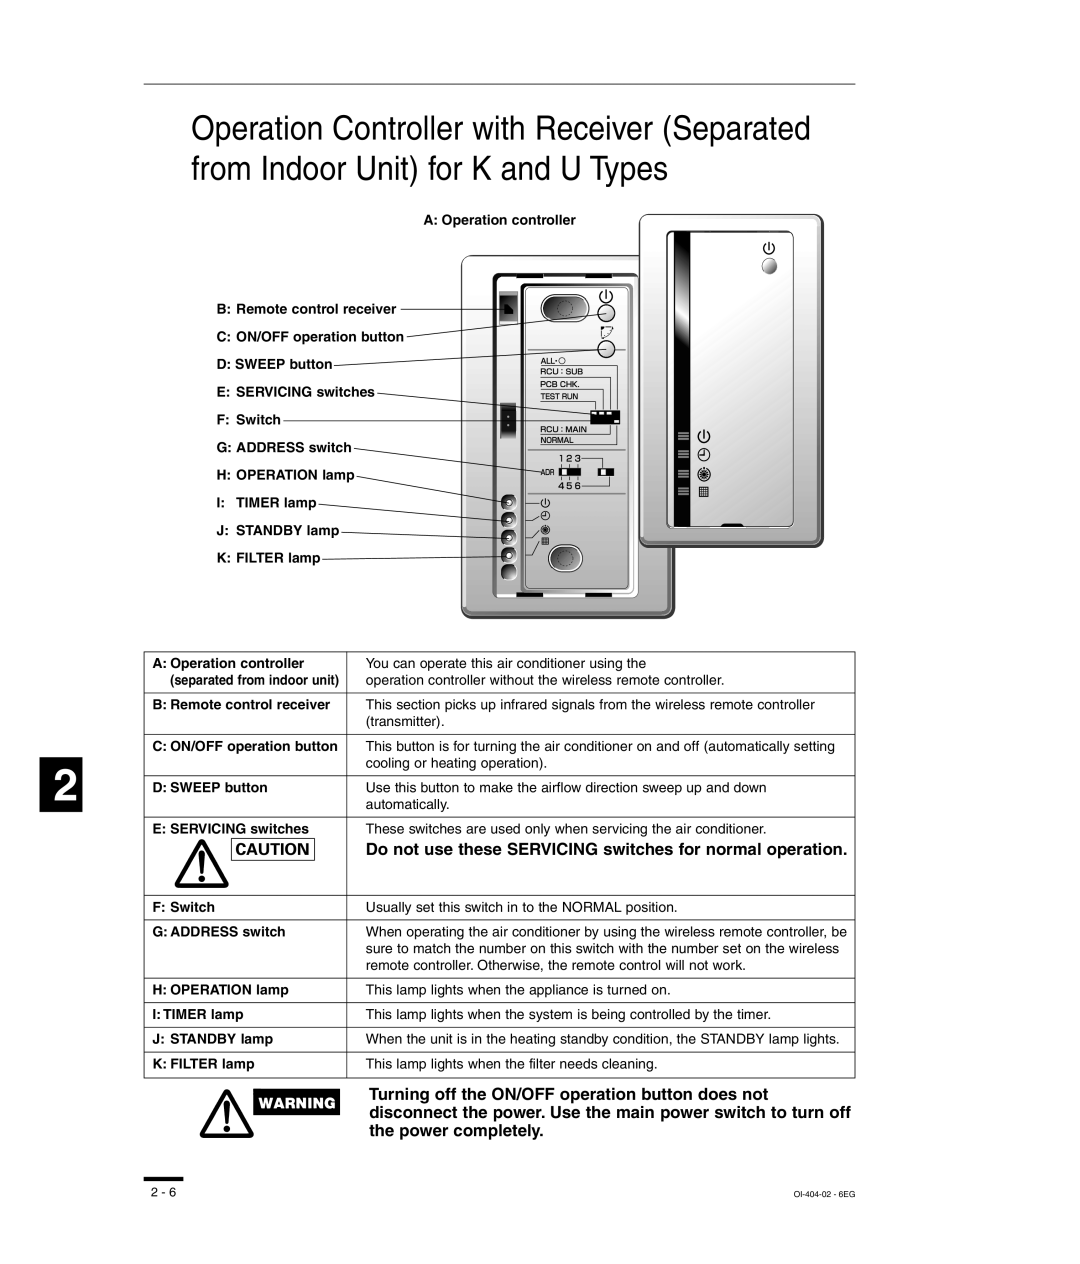 Sanyo RCS-SH80UG, TM-SH80UG, SHA-KC64UG, RCS-SH80UA Turning off the ON/OFF operation button does not, the power completely 